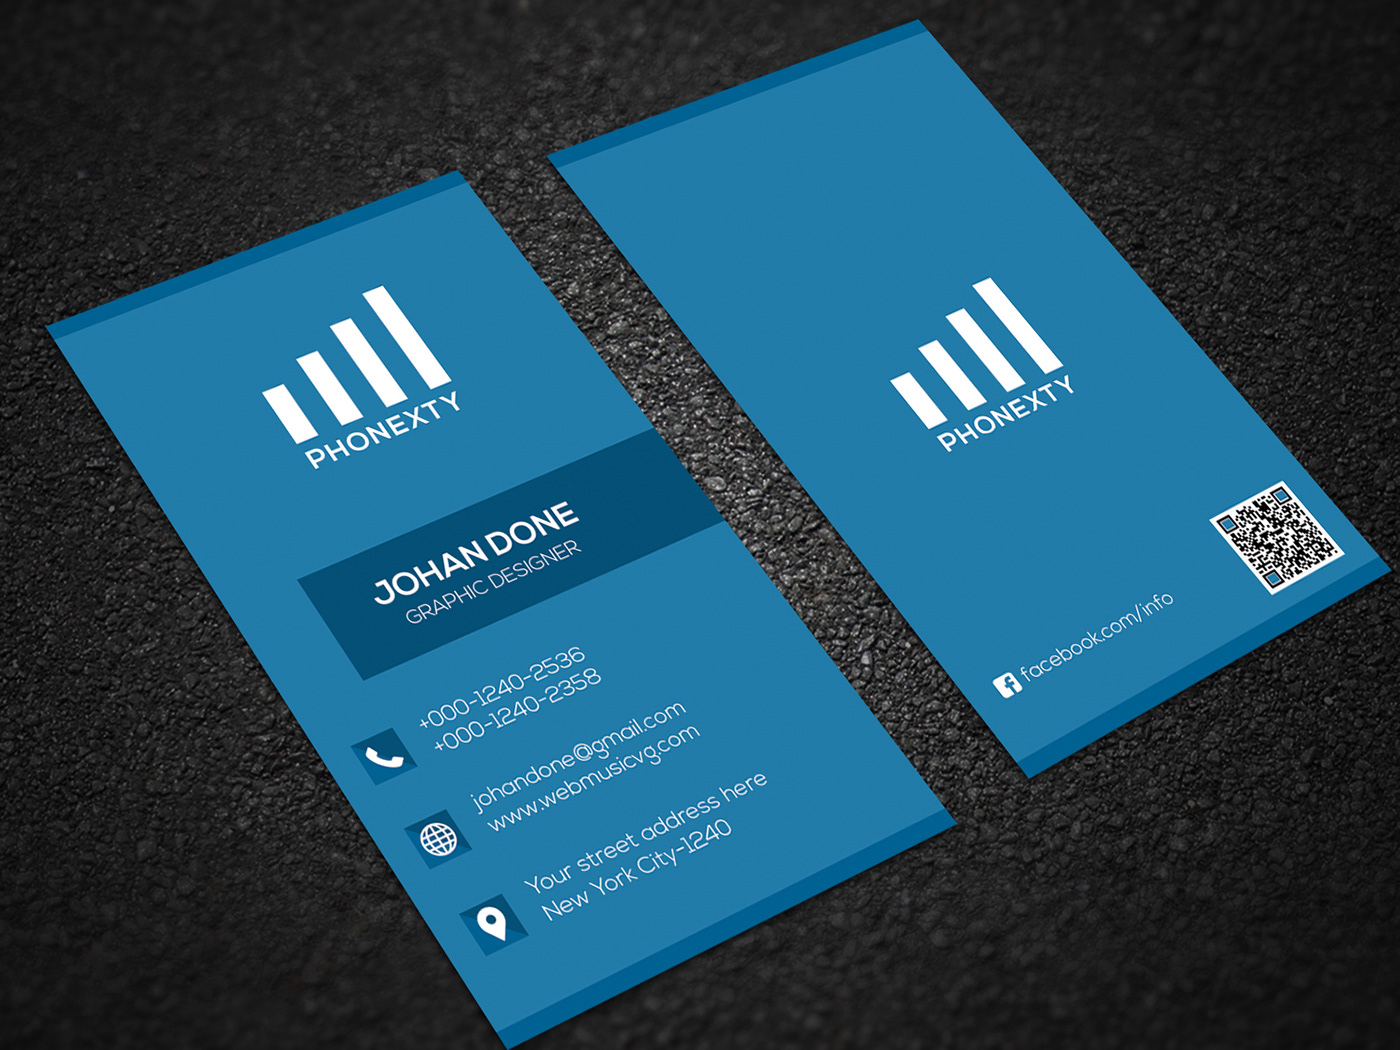 Download Free business card mock up psd. on Behance